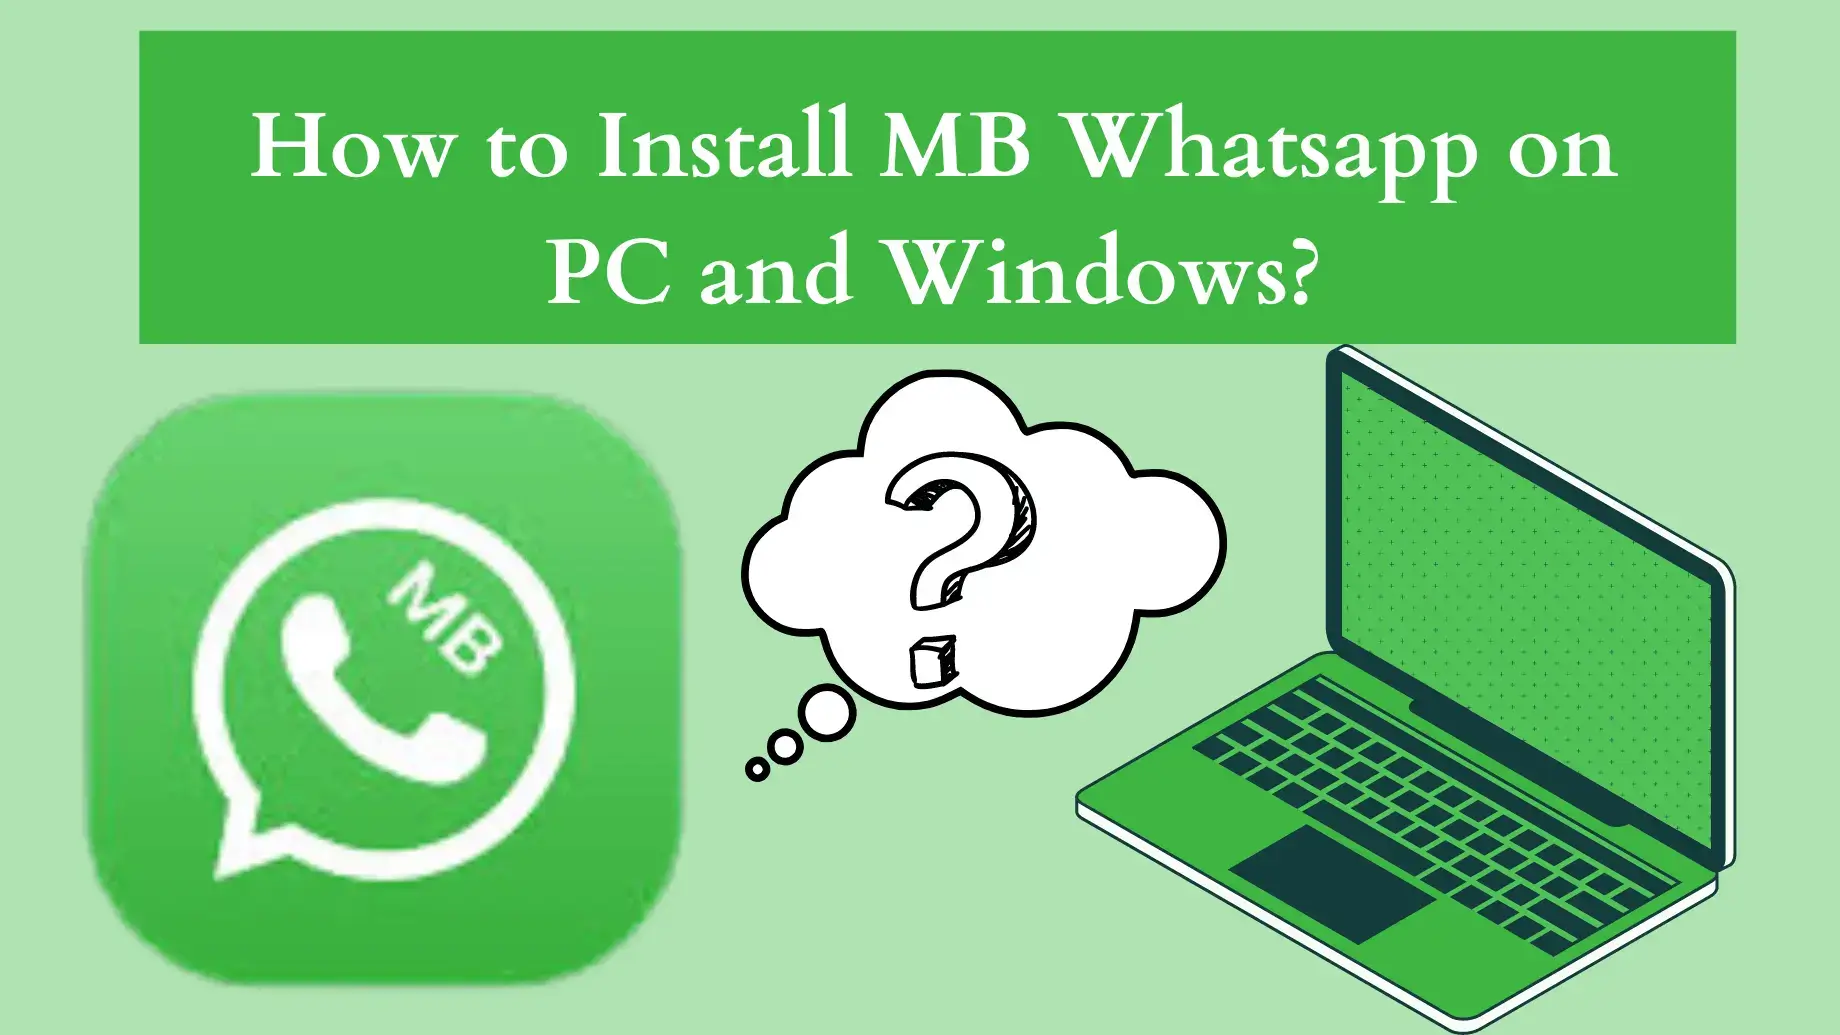 How to Install MB Whatsapp on PC and Windows